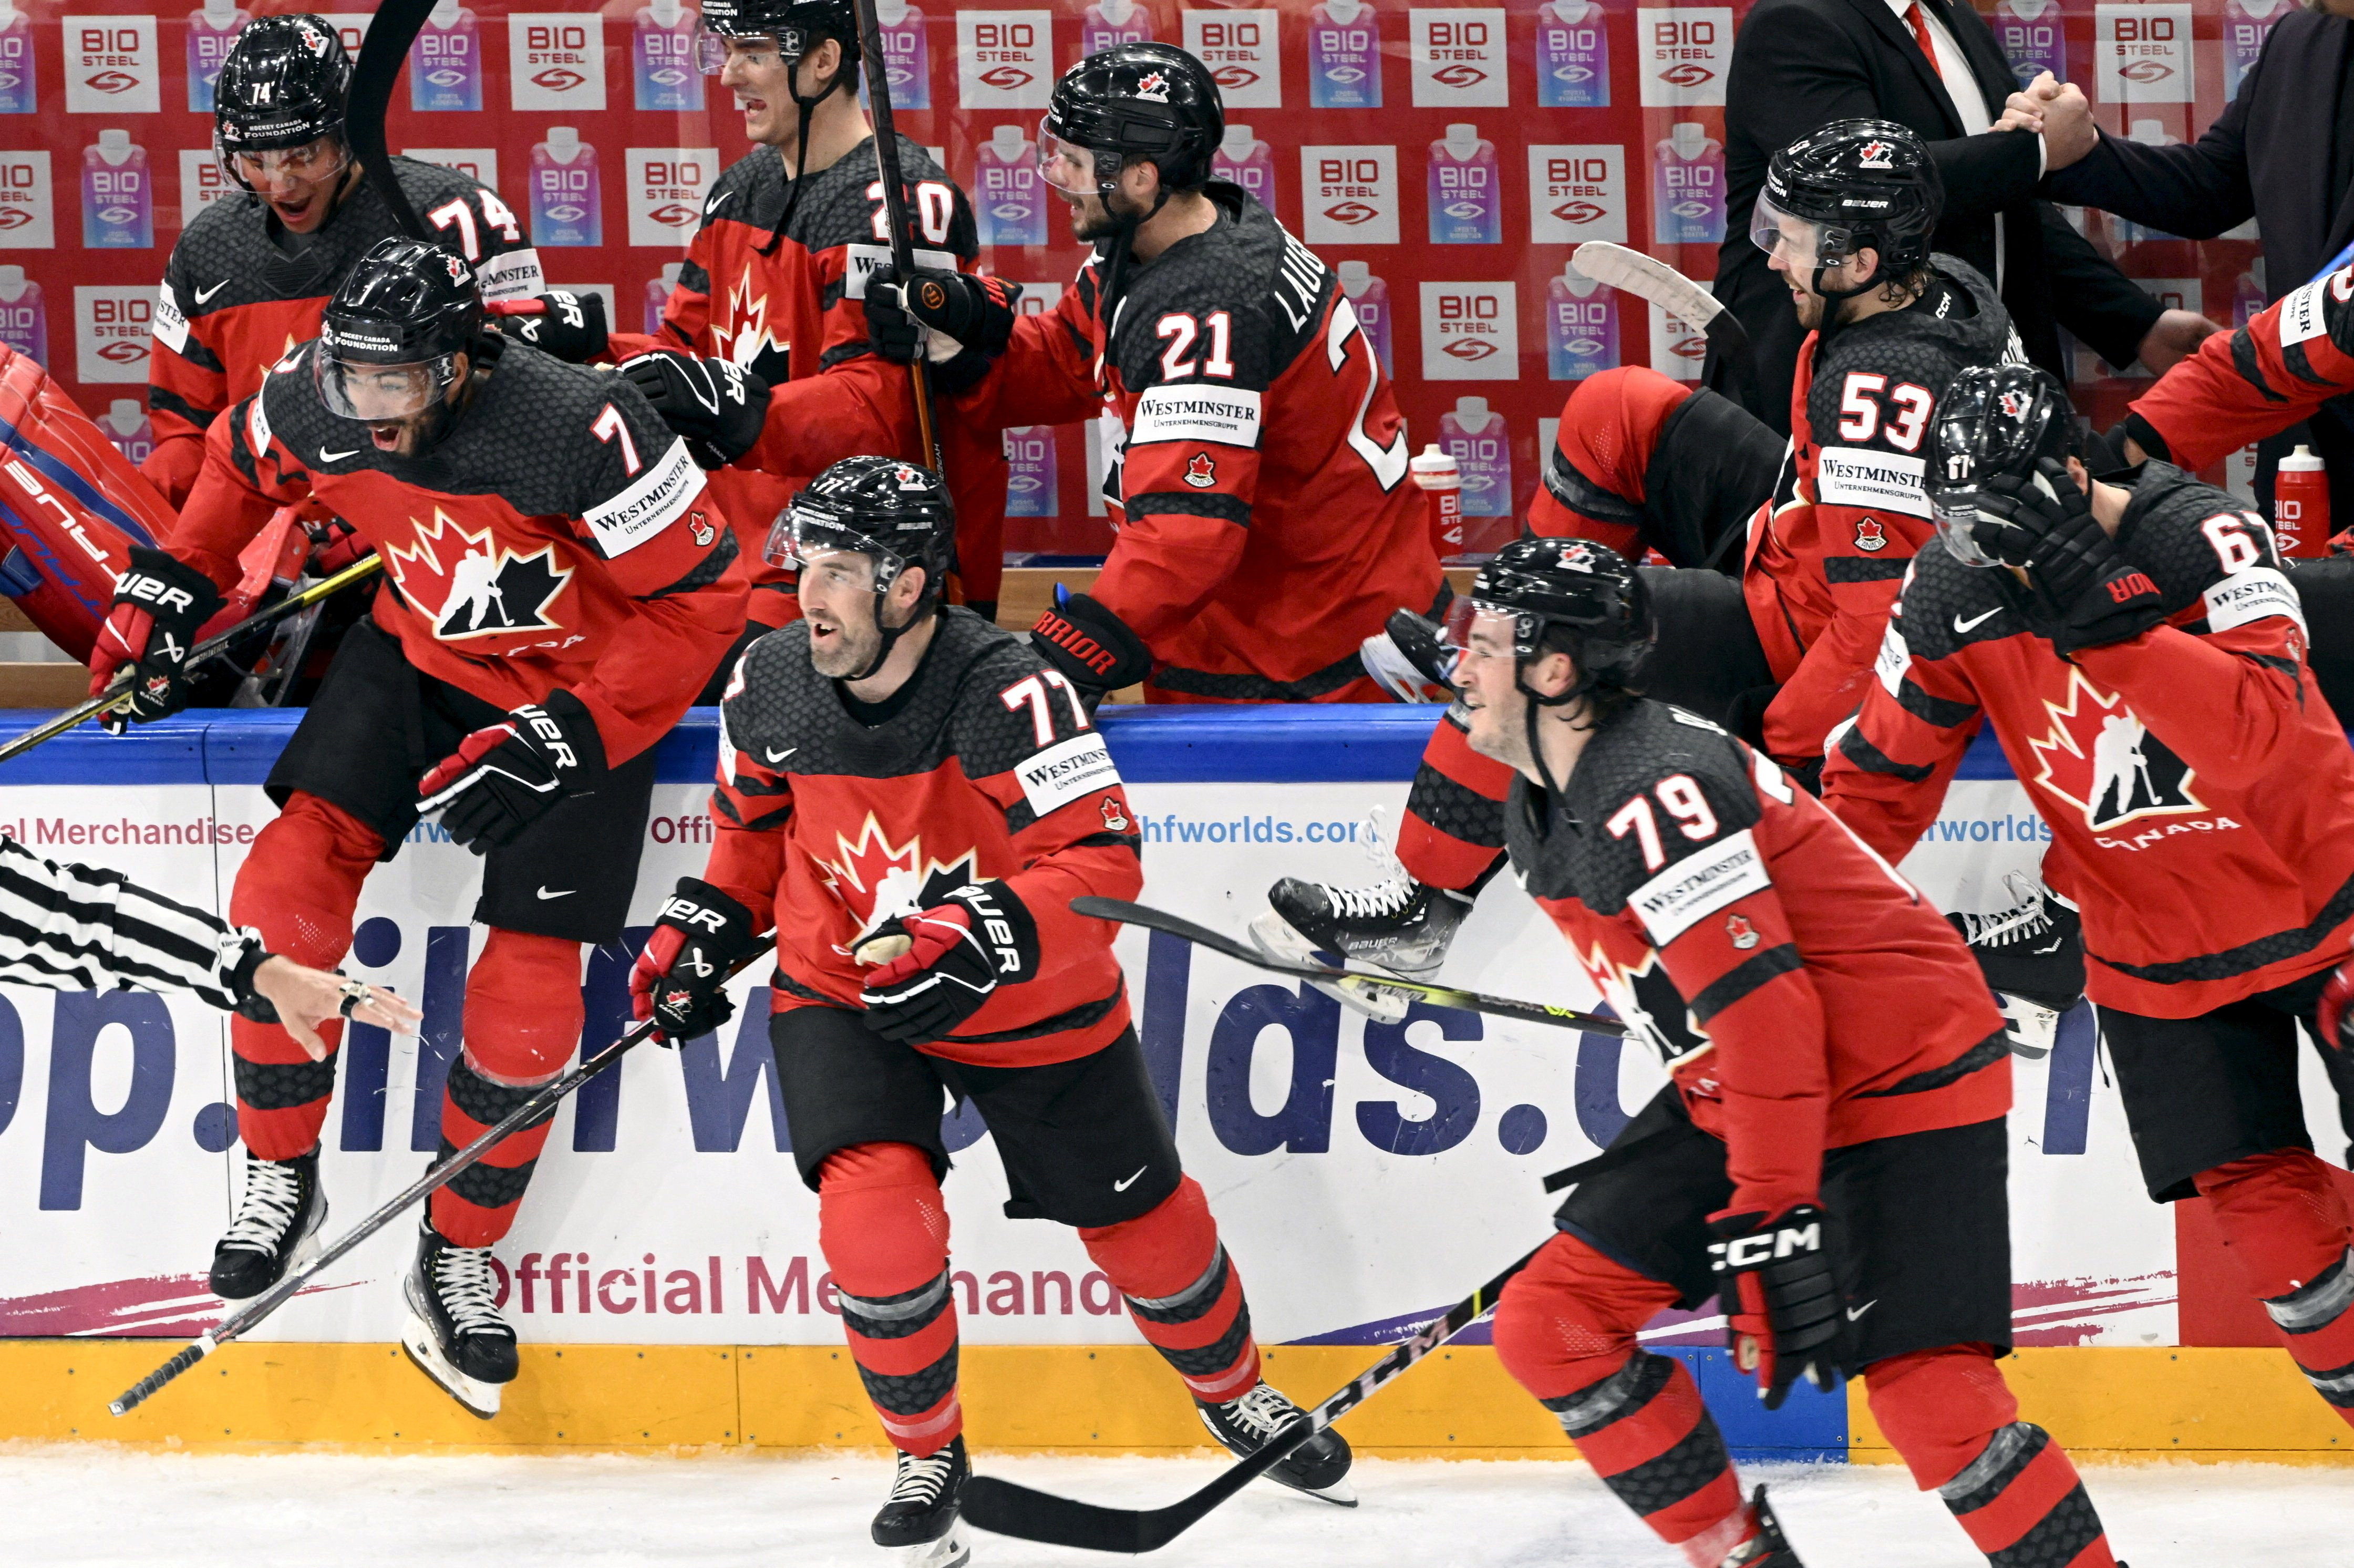 Canada opens Olympic men's hockey tournament with win over Germany